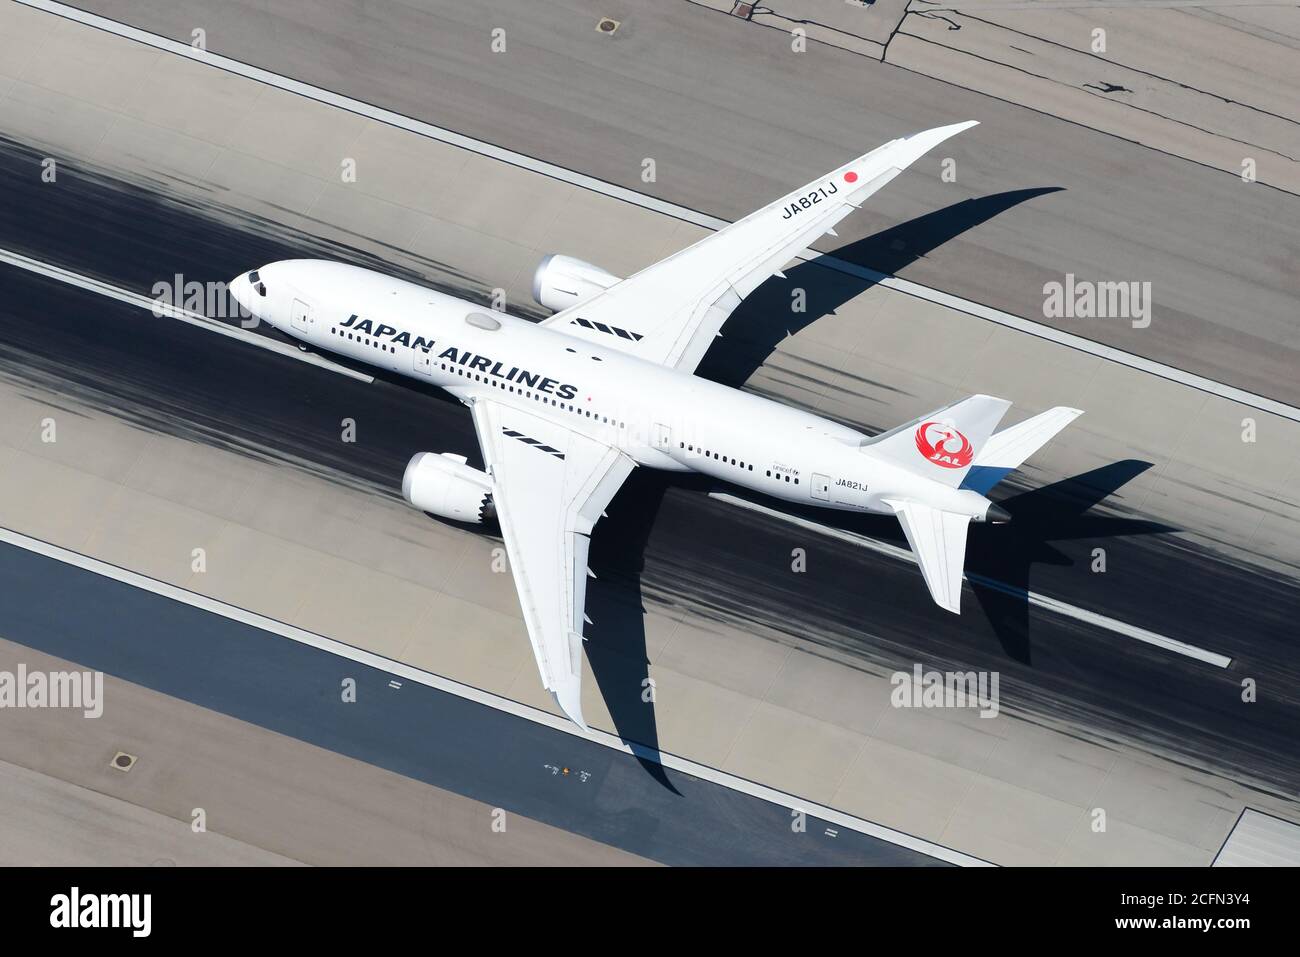 Japan Airlines Boeing 787 Dreamliner departing at an international airport runway. JAL Airlines aircraf. Stock Photo